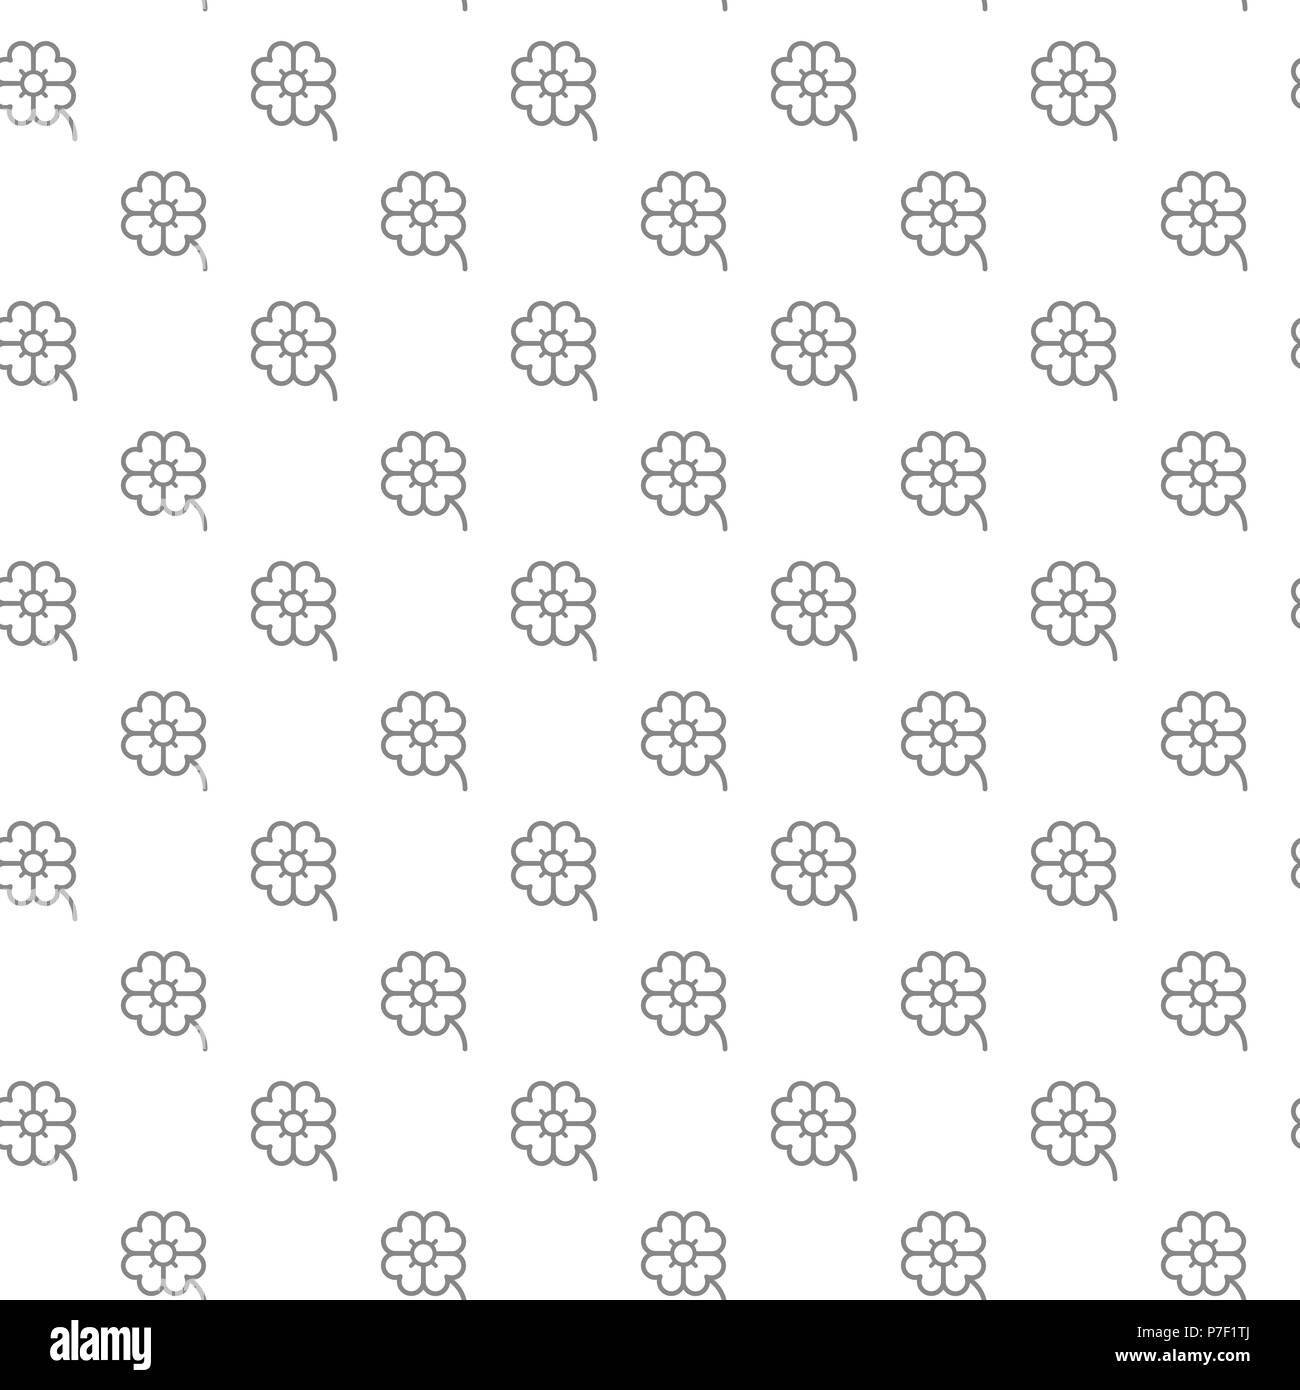 Simple four leaf clover seamless pattern with various icons and symbols on white background flat vector illustration Stock Vector